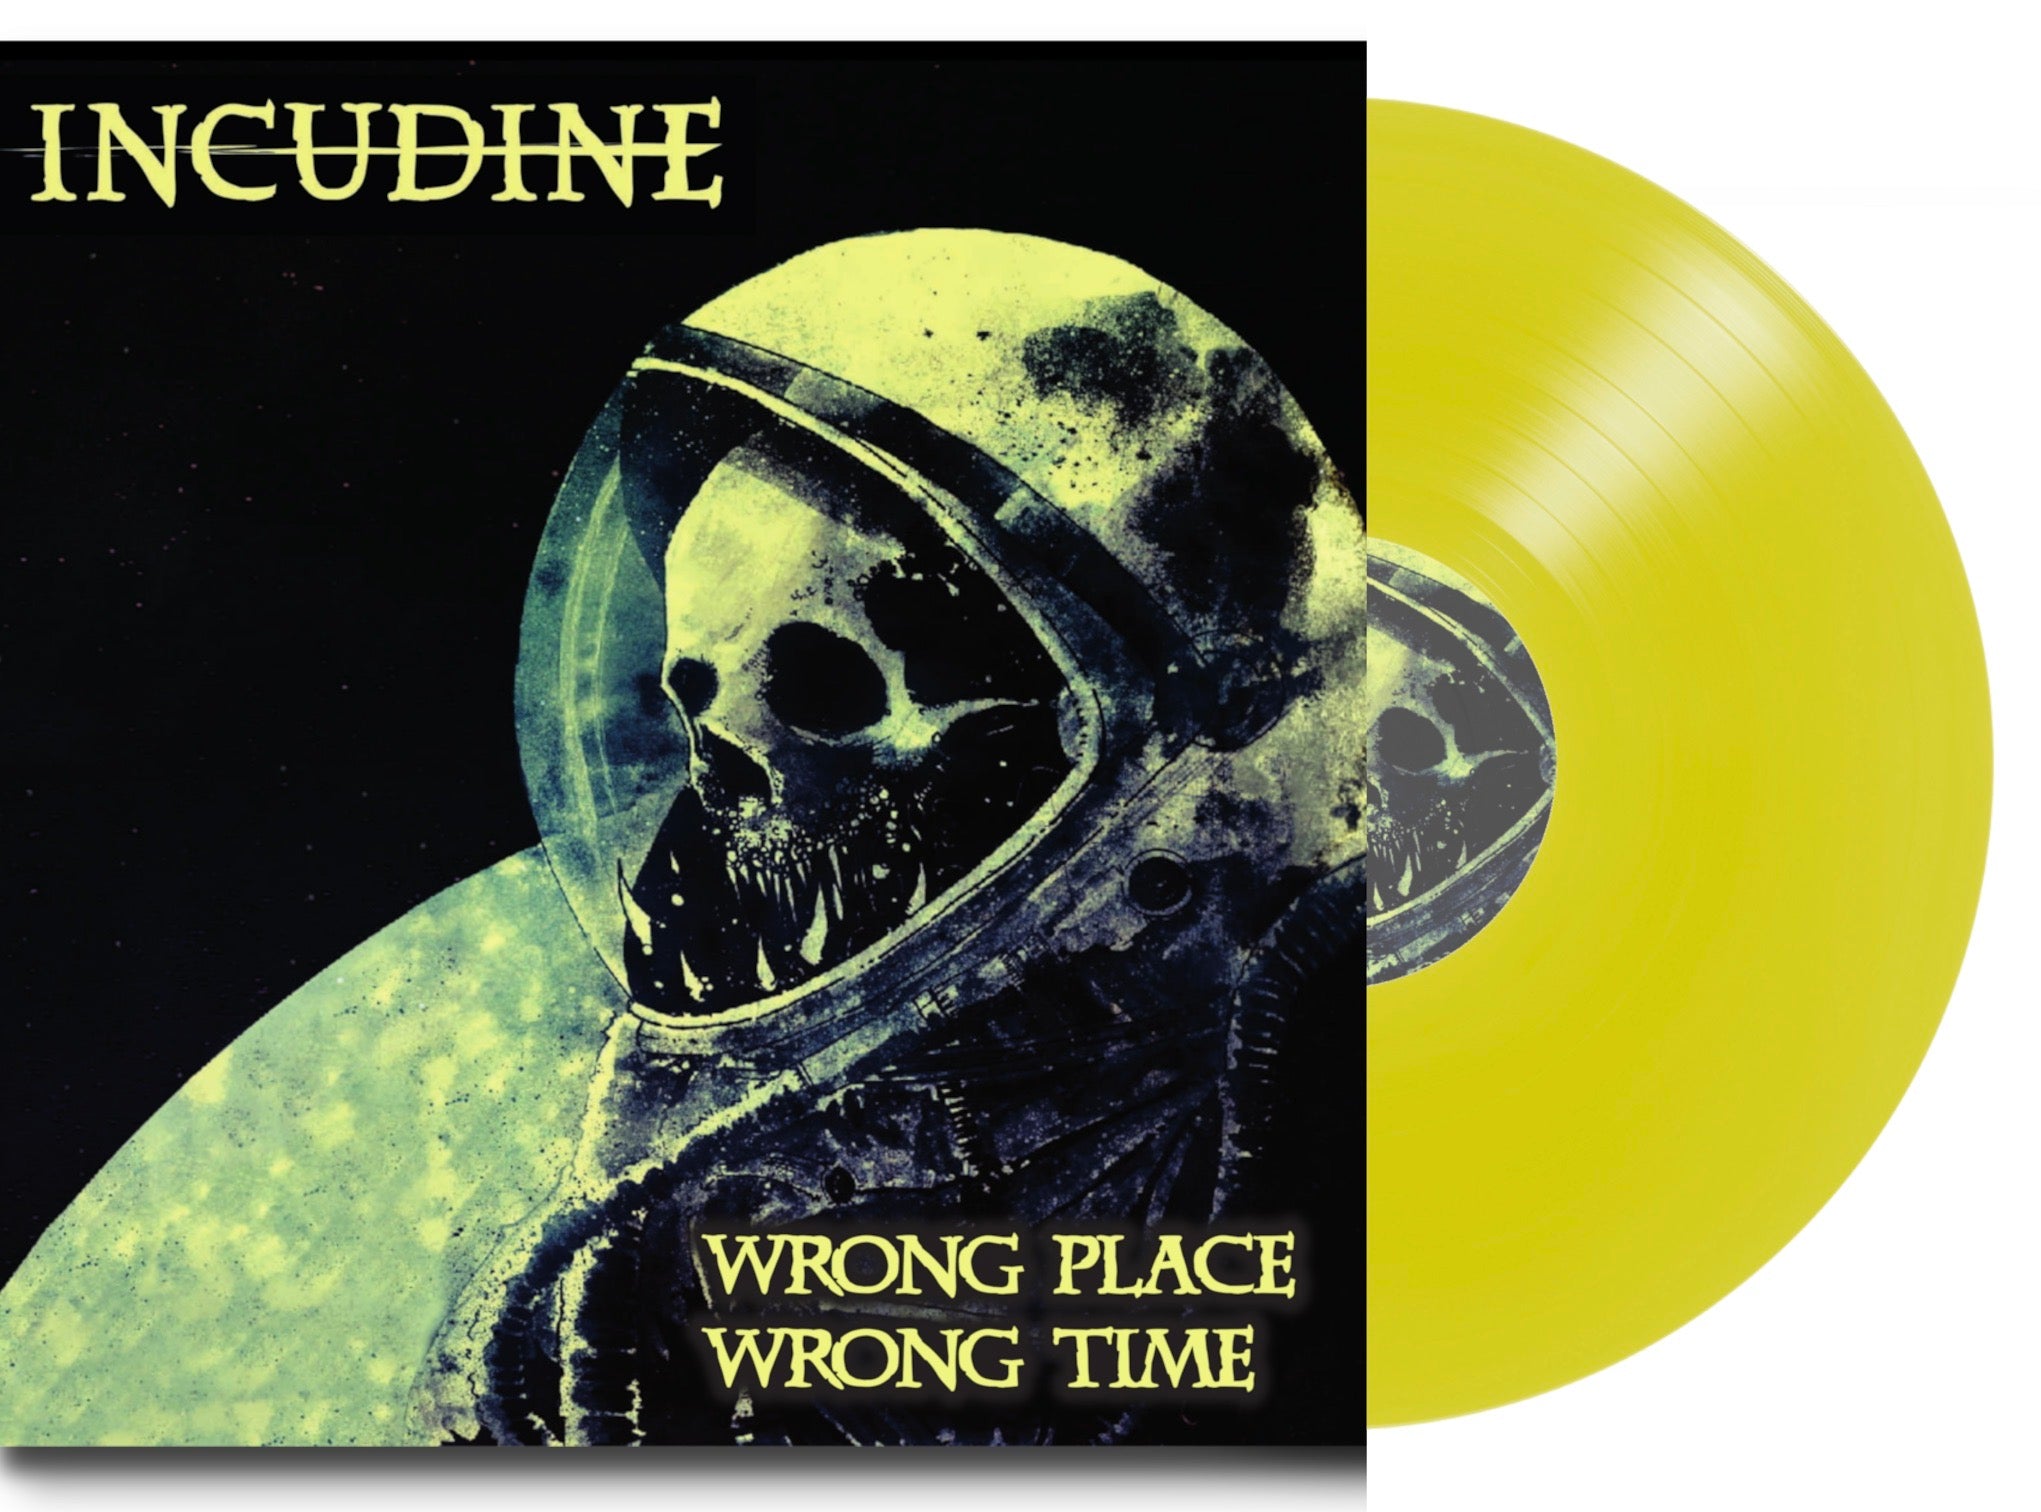 INCUDINE 'Wrong Place Wrong Time' LP / COLORED EDITIONS